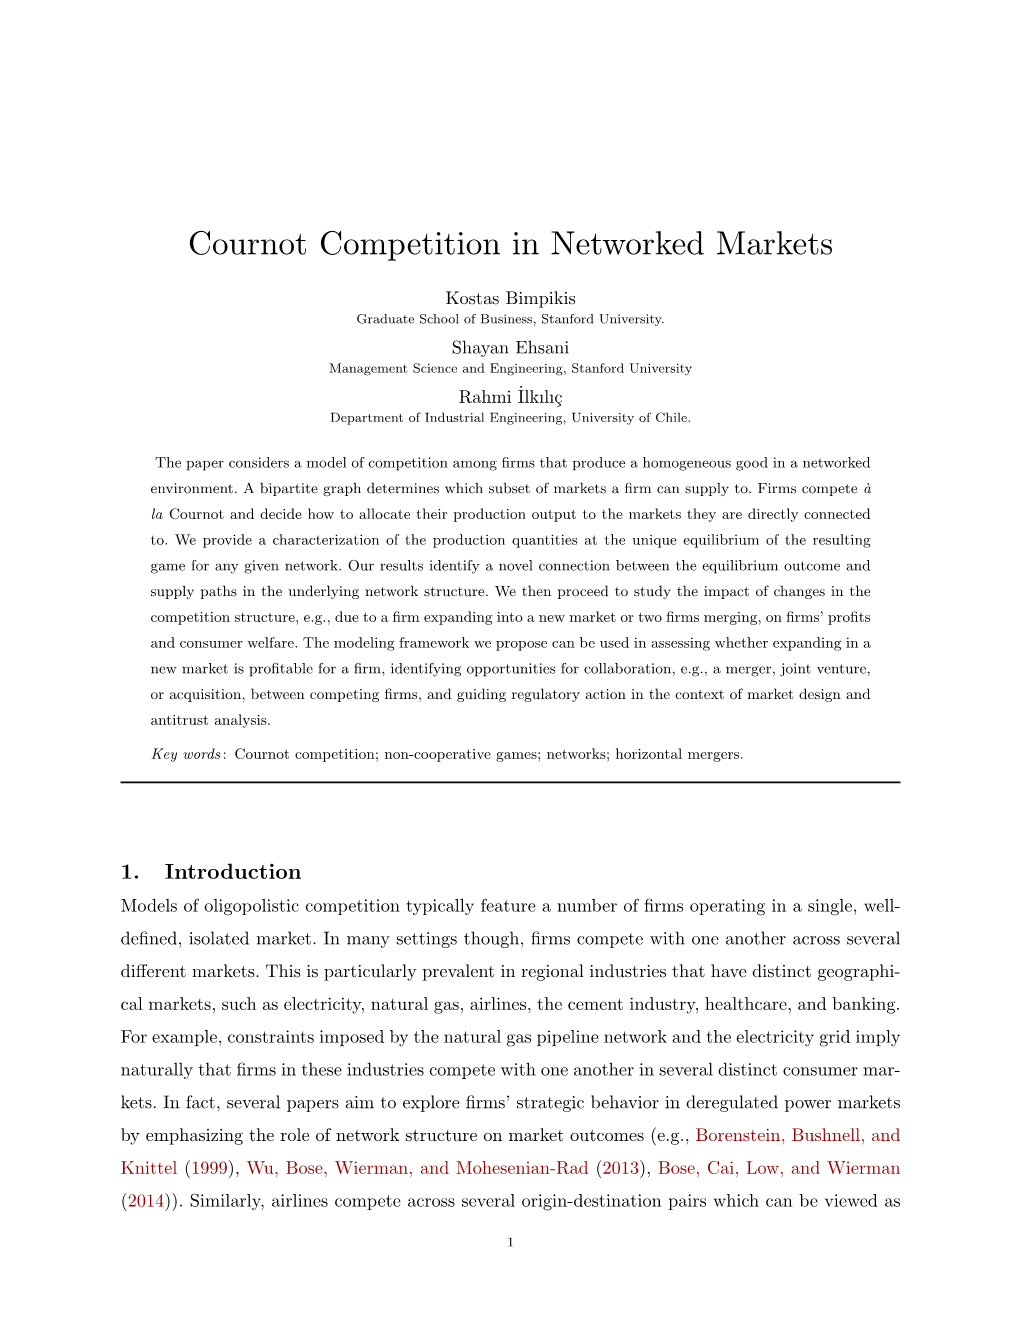 Cournot Competition in Networked Markets